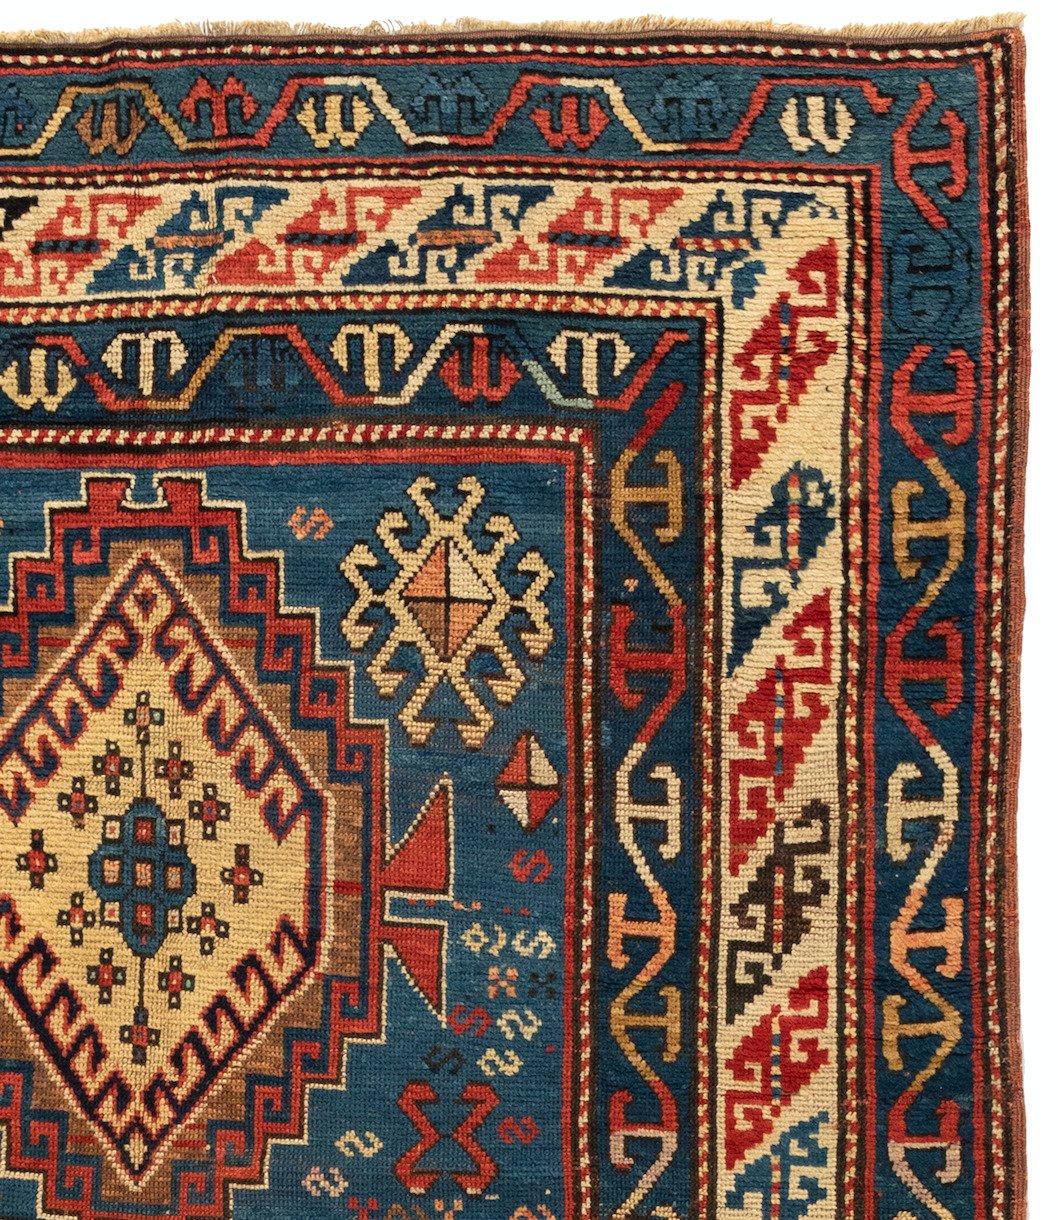 Antique Caucasian Tribal Blue Red Kazak Carpet, c. 1900s-1910s In Good Condition For Sale In New York, NY